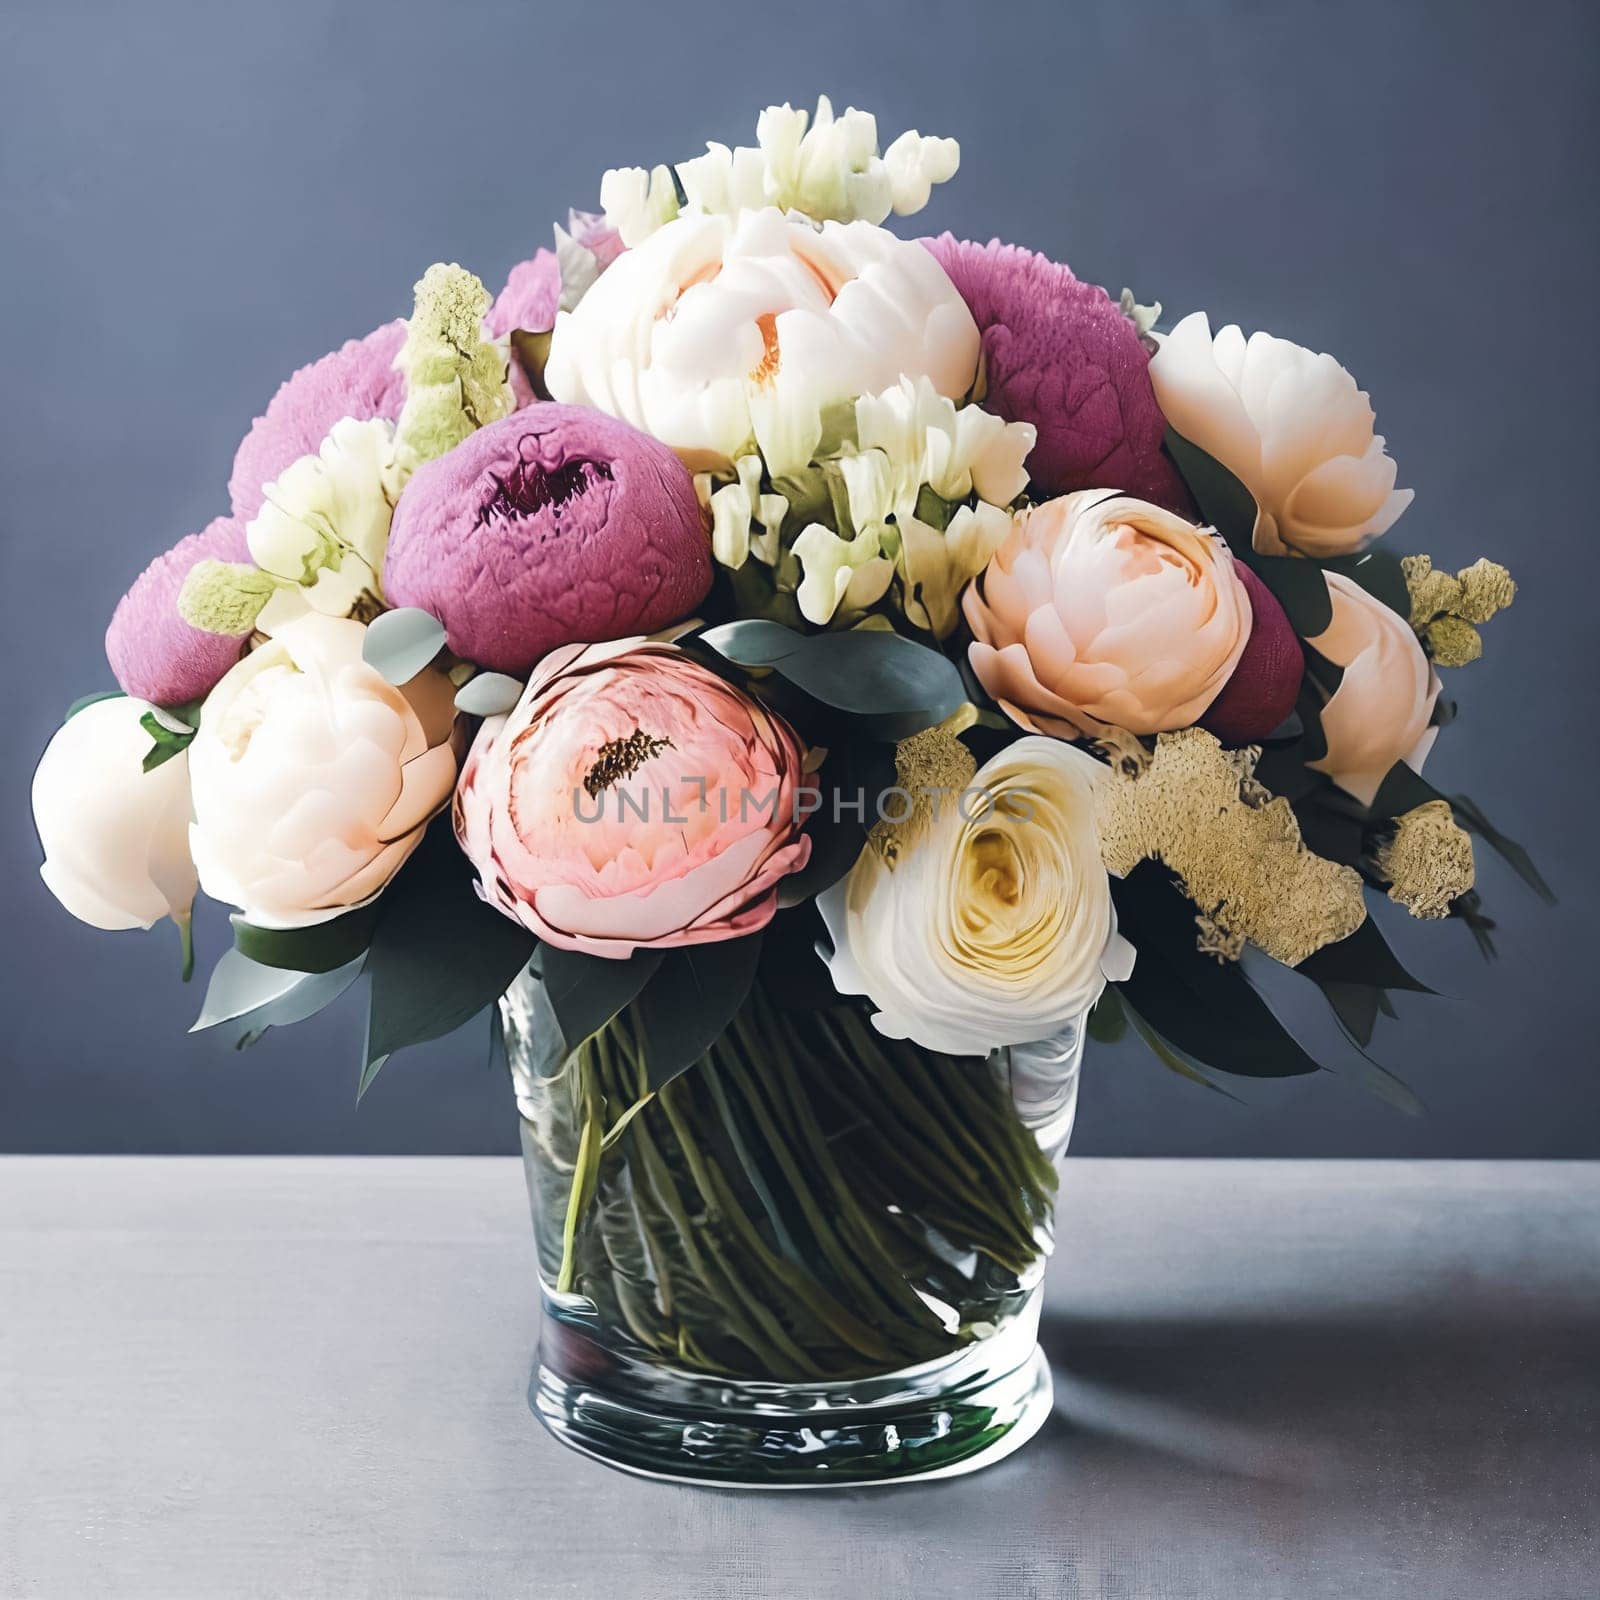 Floral Elegance. A vibrant bouquet of spring flowers arranged in a stylish vase by GoodOlga